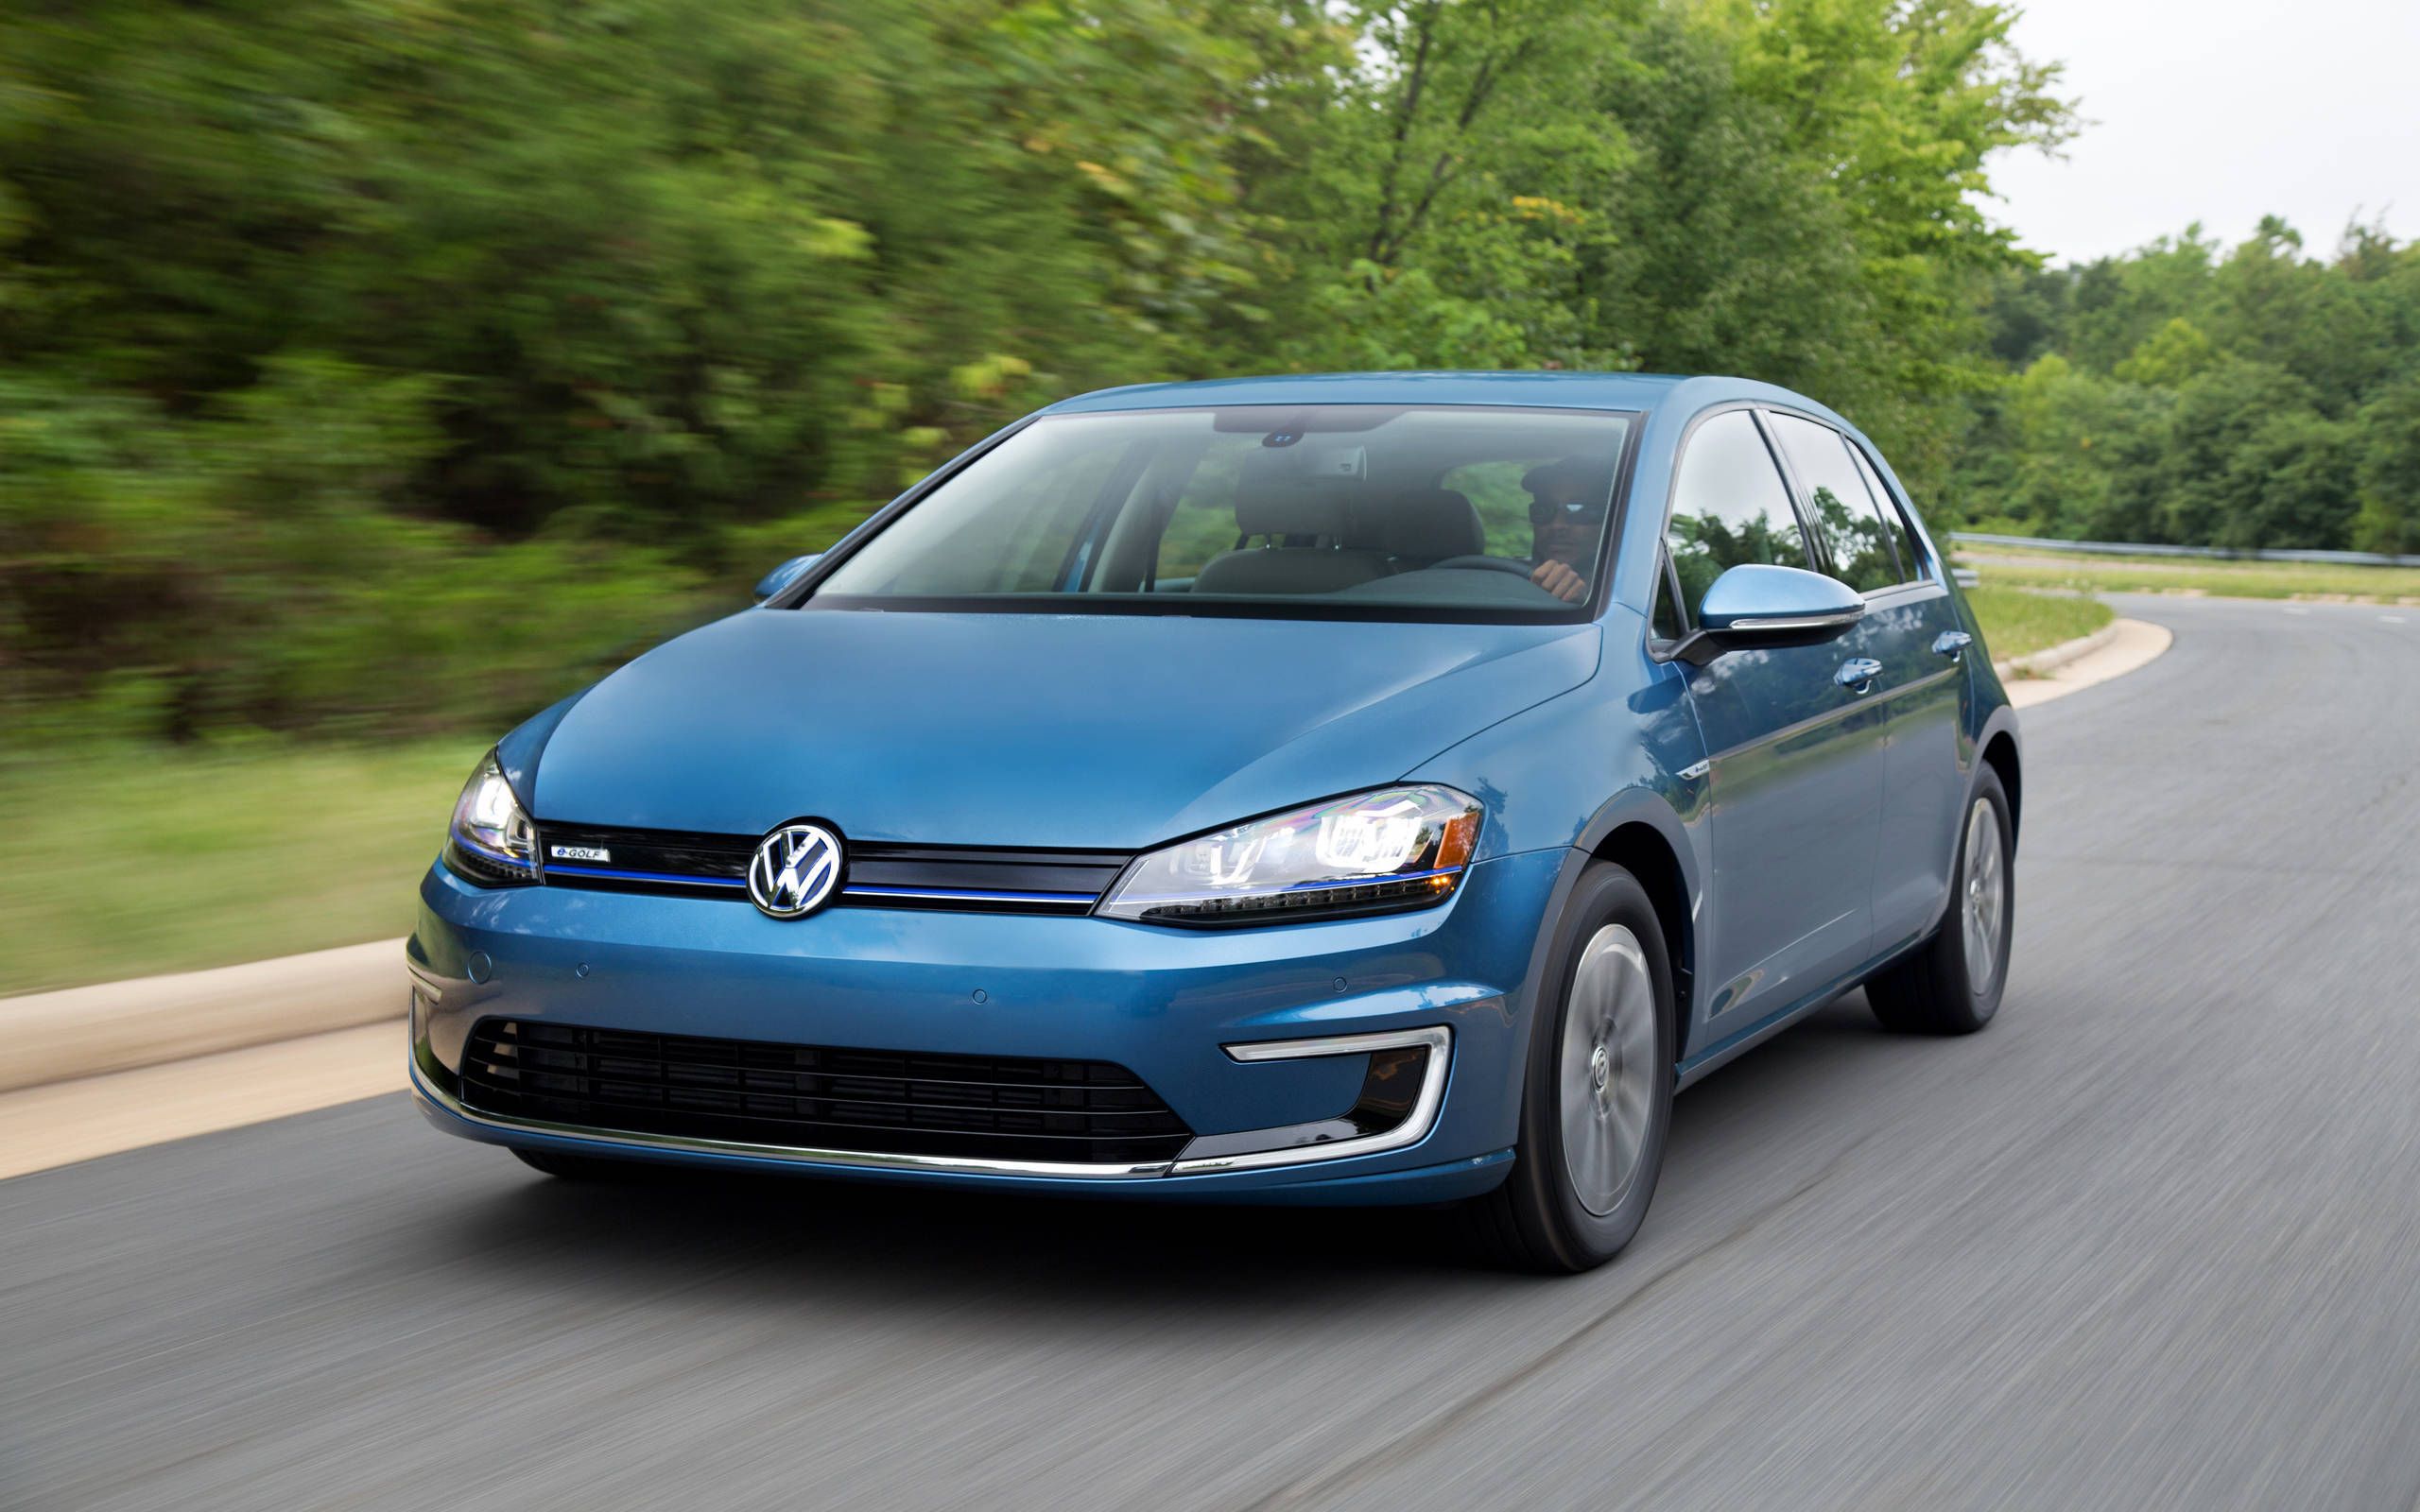 2015 Volkswagen e-Golf review notes: Great car -- just don't go too far